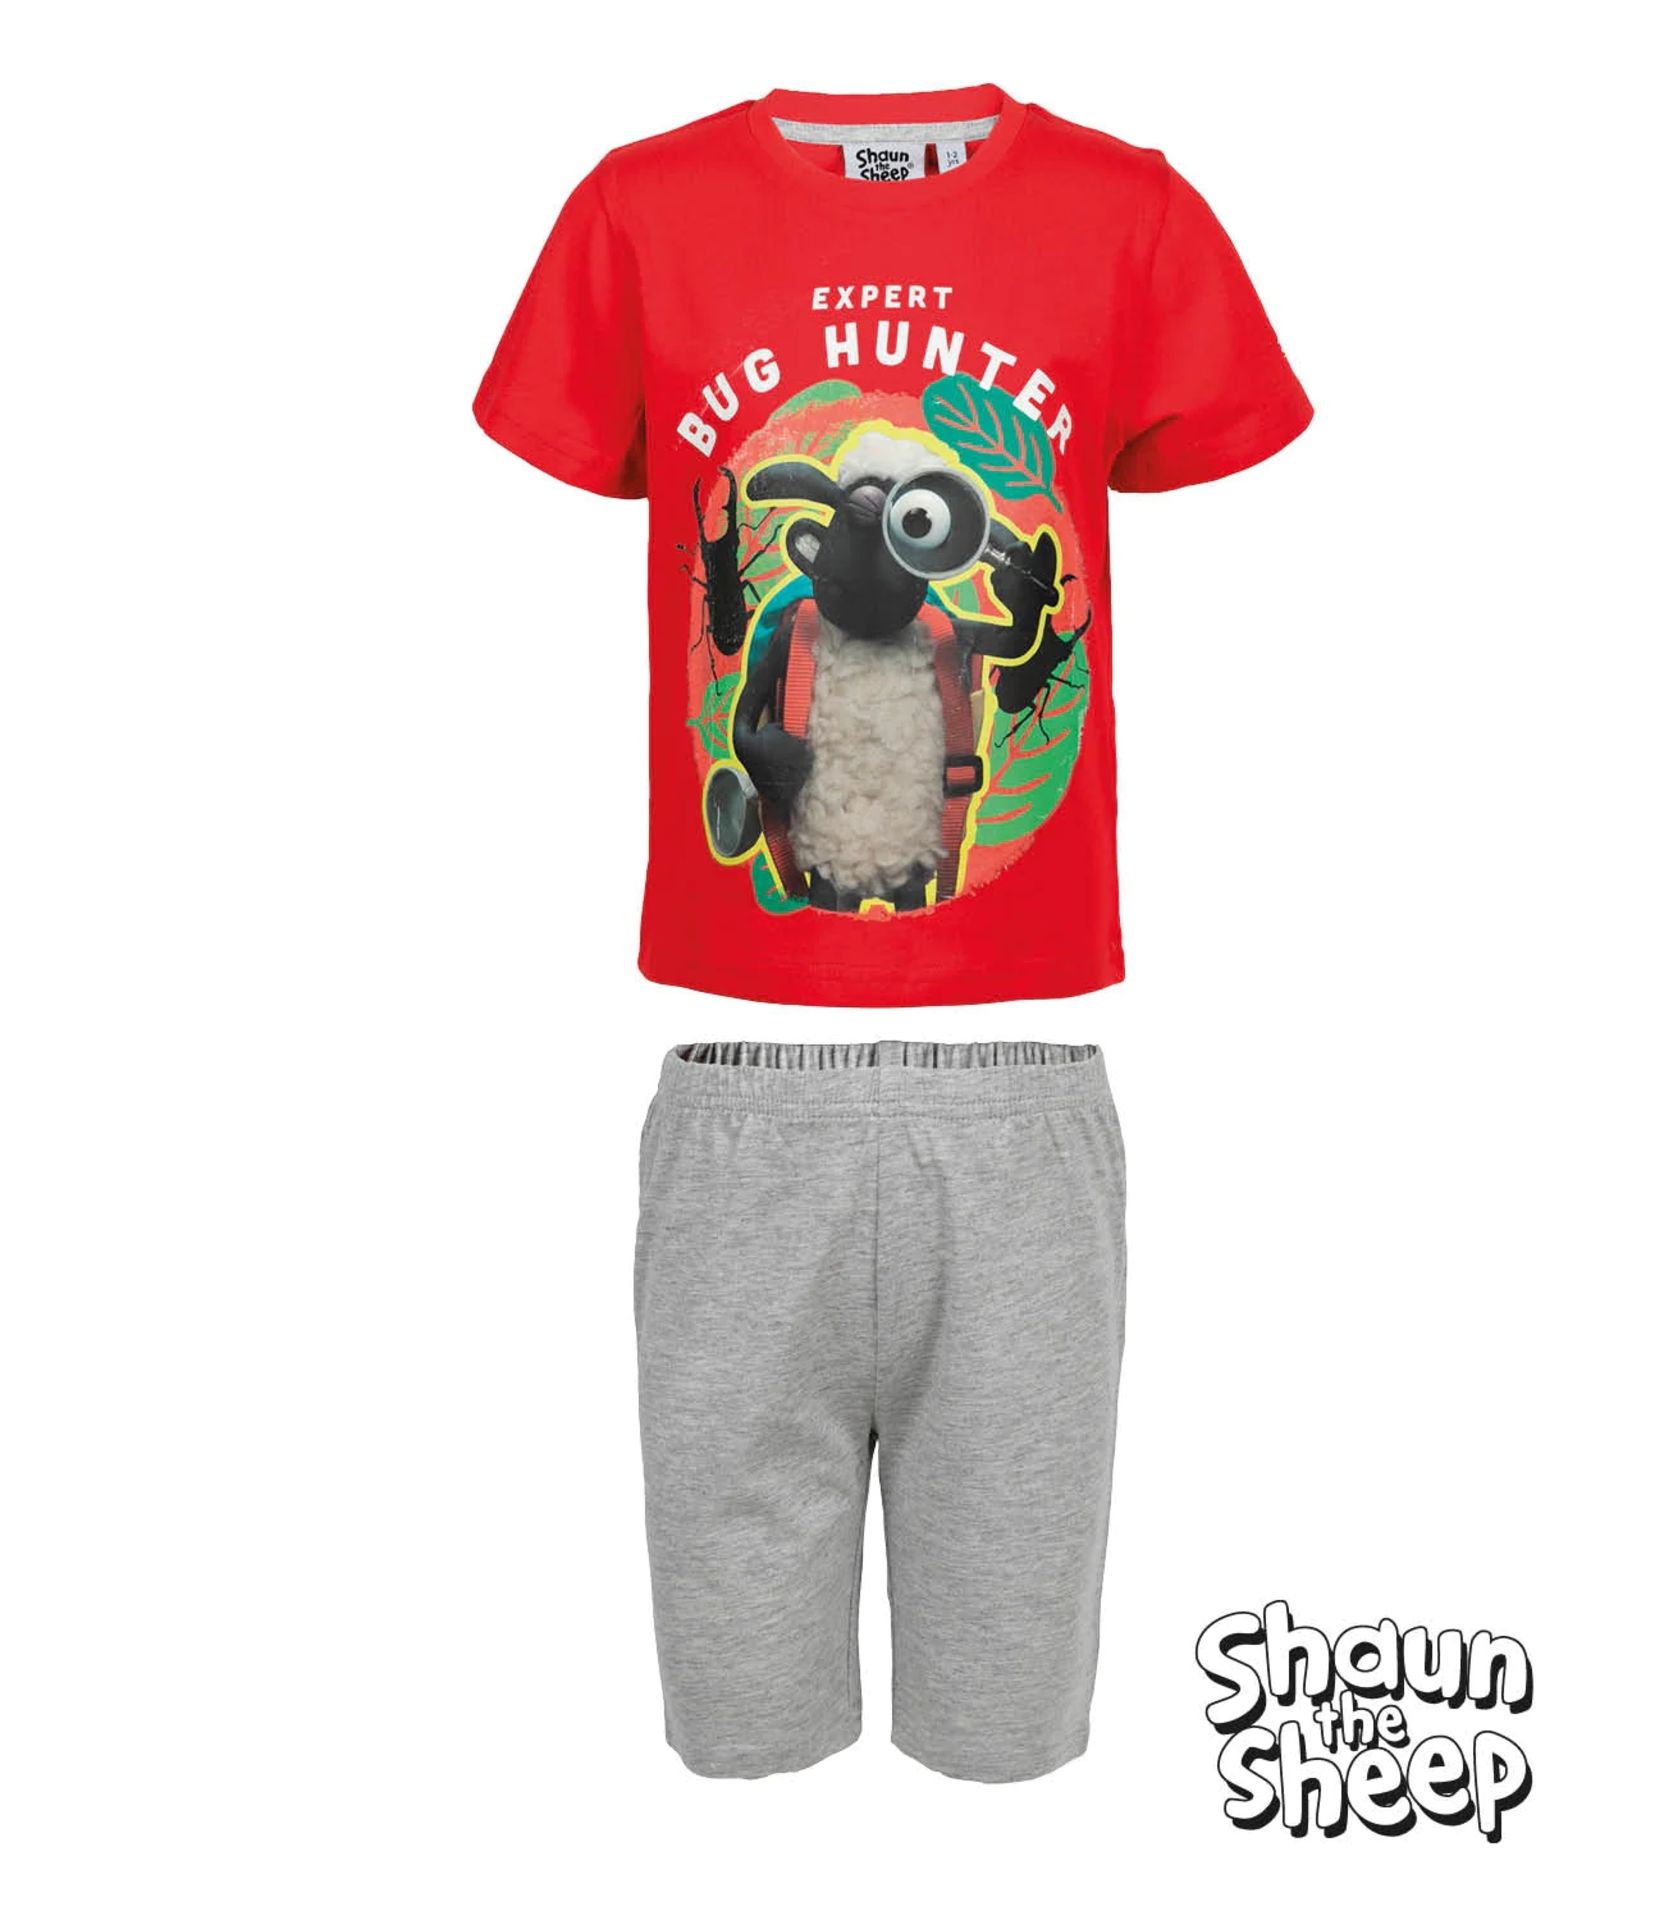 TRADE LOT 192 x New & Packaged Official Licenced Shaun The Sheep Pajamas. Sizes: 1-2, 3-4, 5-6 & 7- - Image 2 of 2